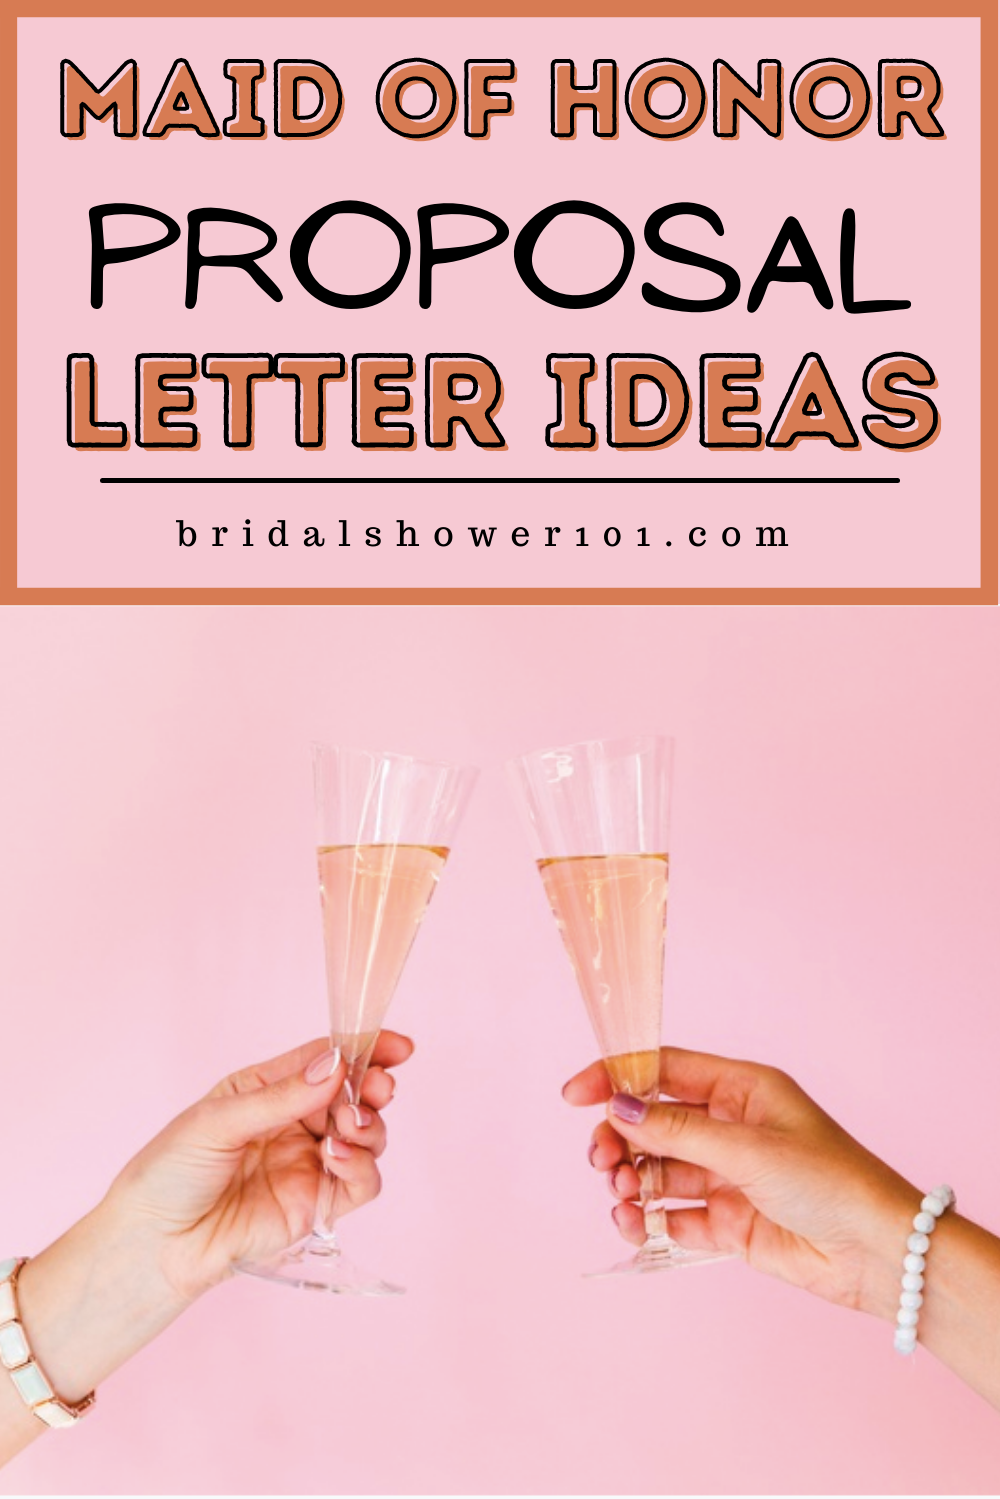 how-to-write-a-maid-of-honor-proposal-letter-bridal-shower-101